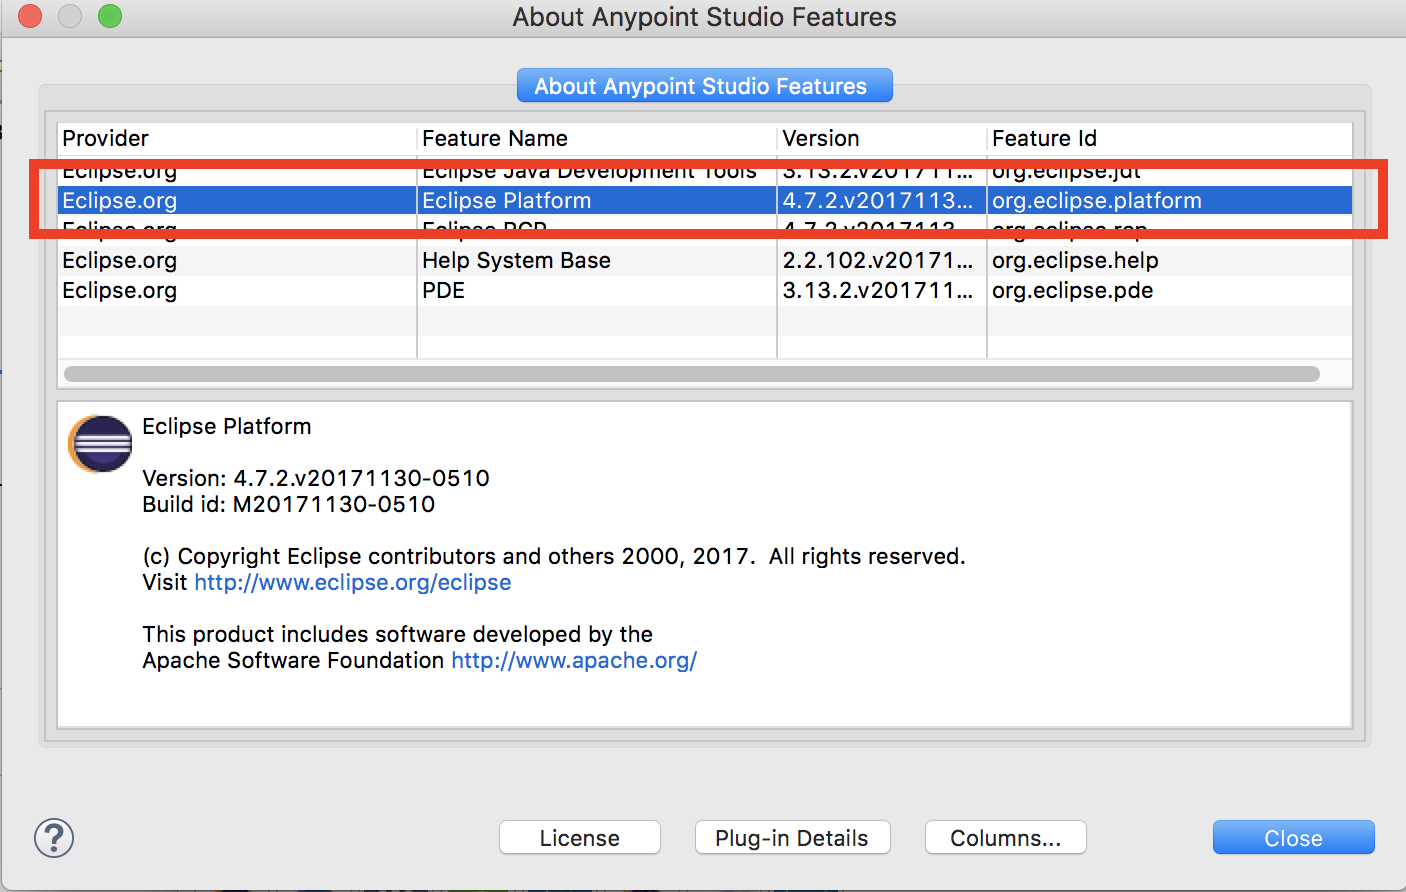 How to identify the Eclipse version used in Anypoint Studio MuleSoft